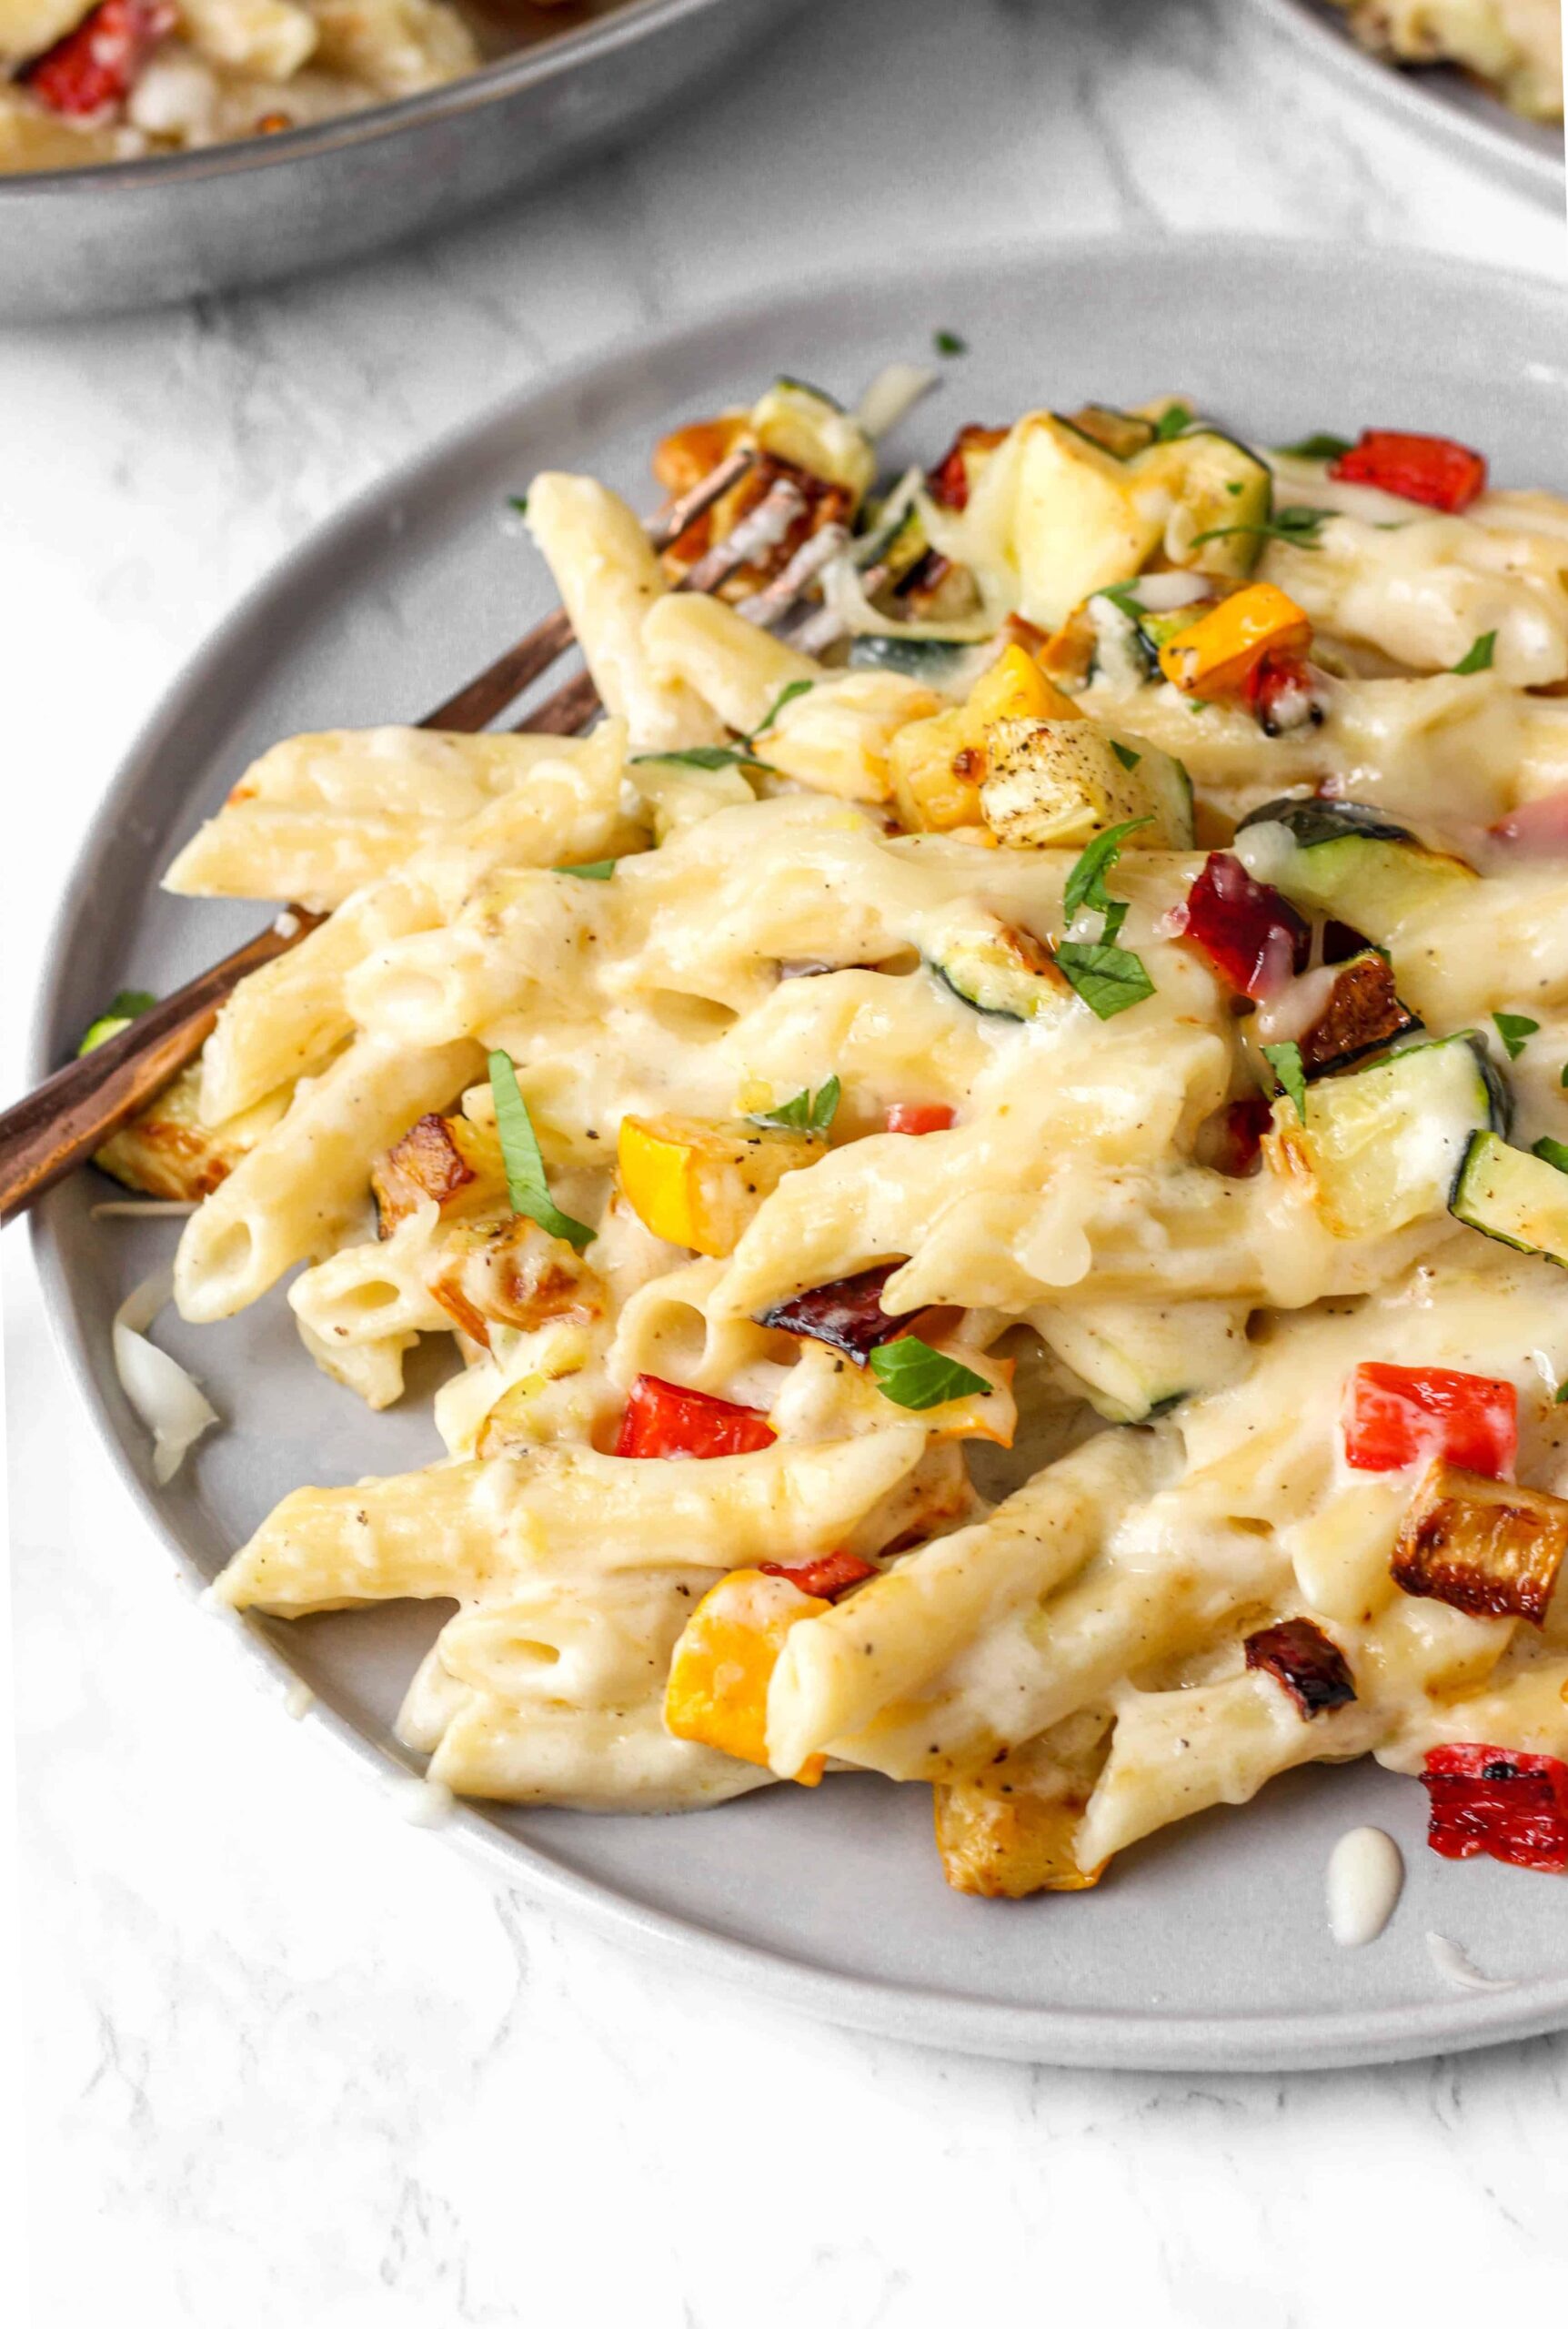  Satisfy your cravings with this creamy and flavorful pasta dish.